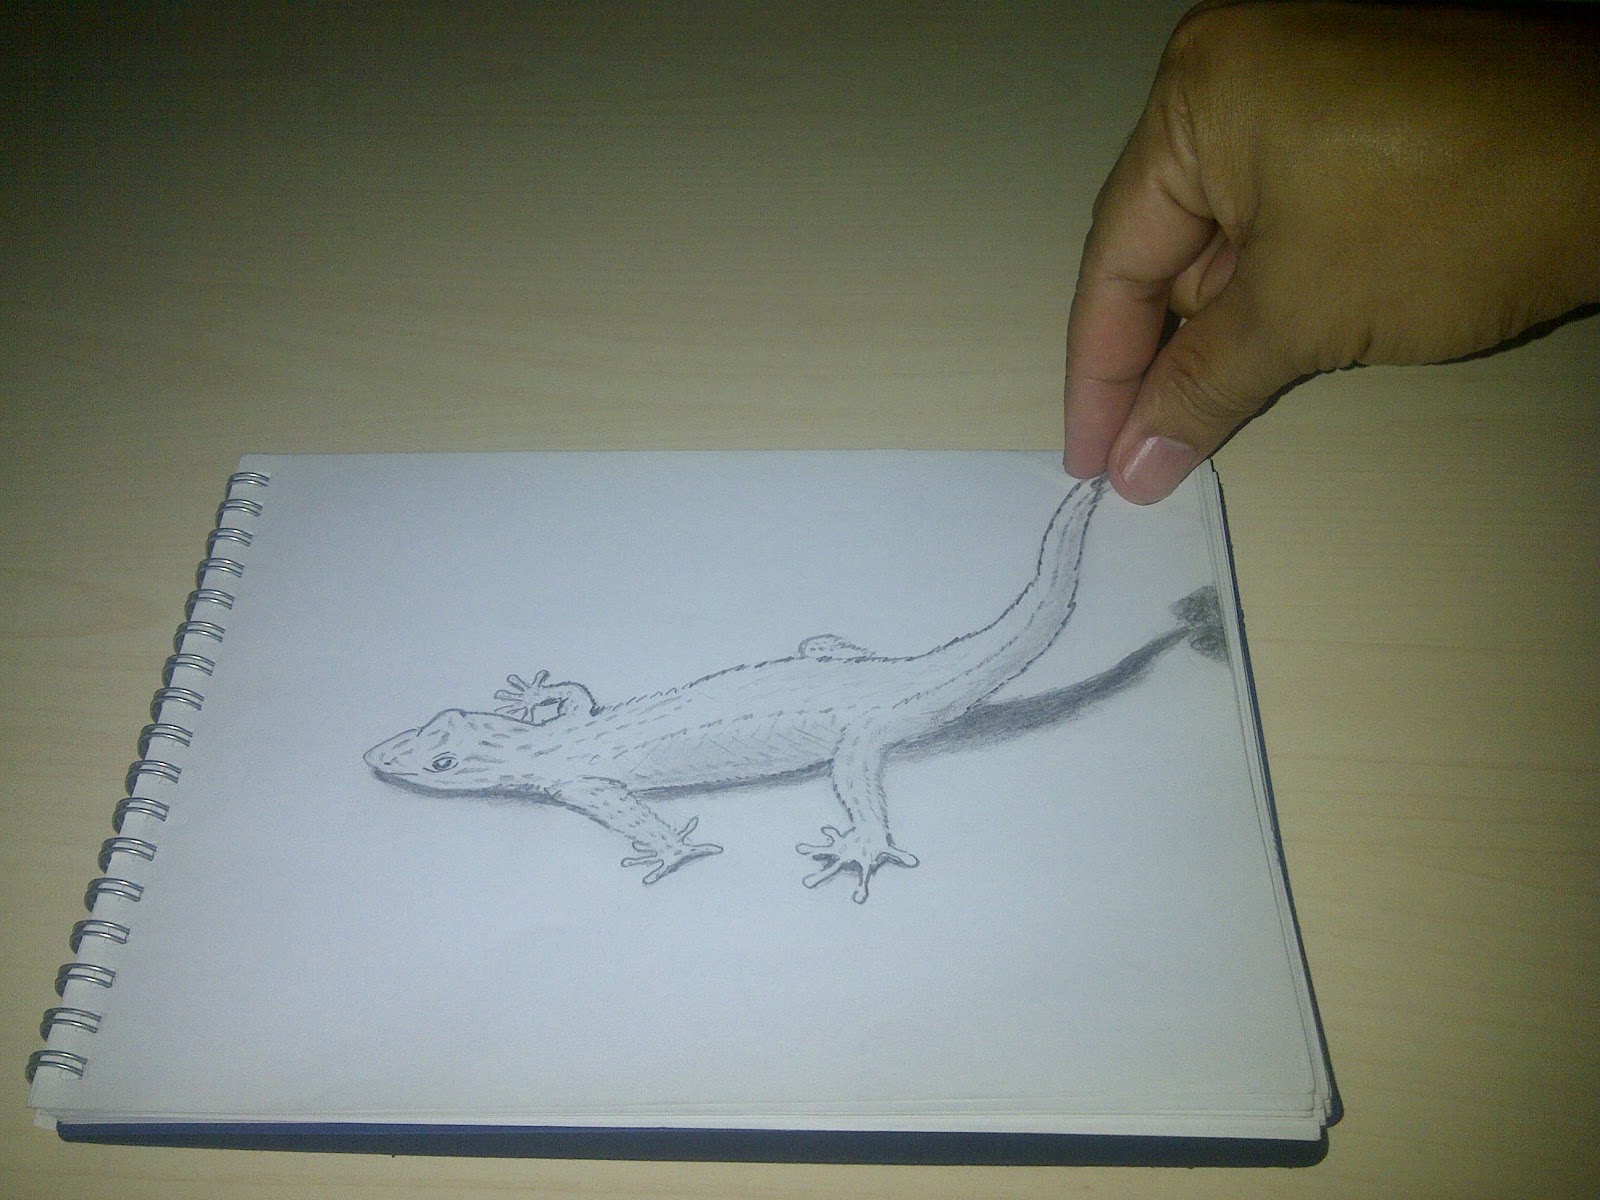 Tinkering with Creative and Innovative 1st 3D Pencil Drawing